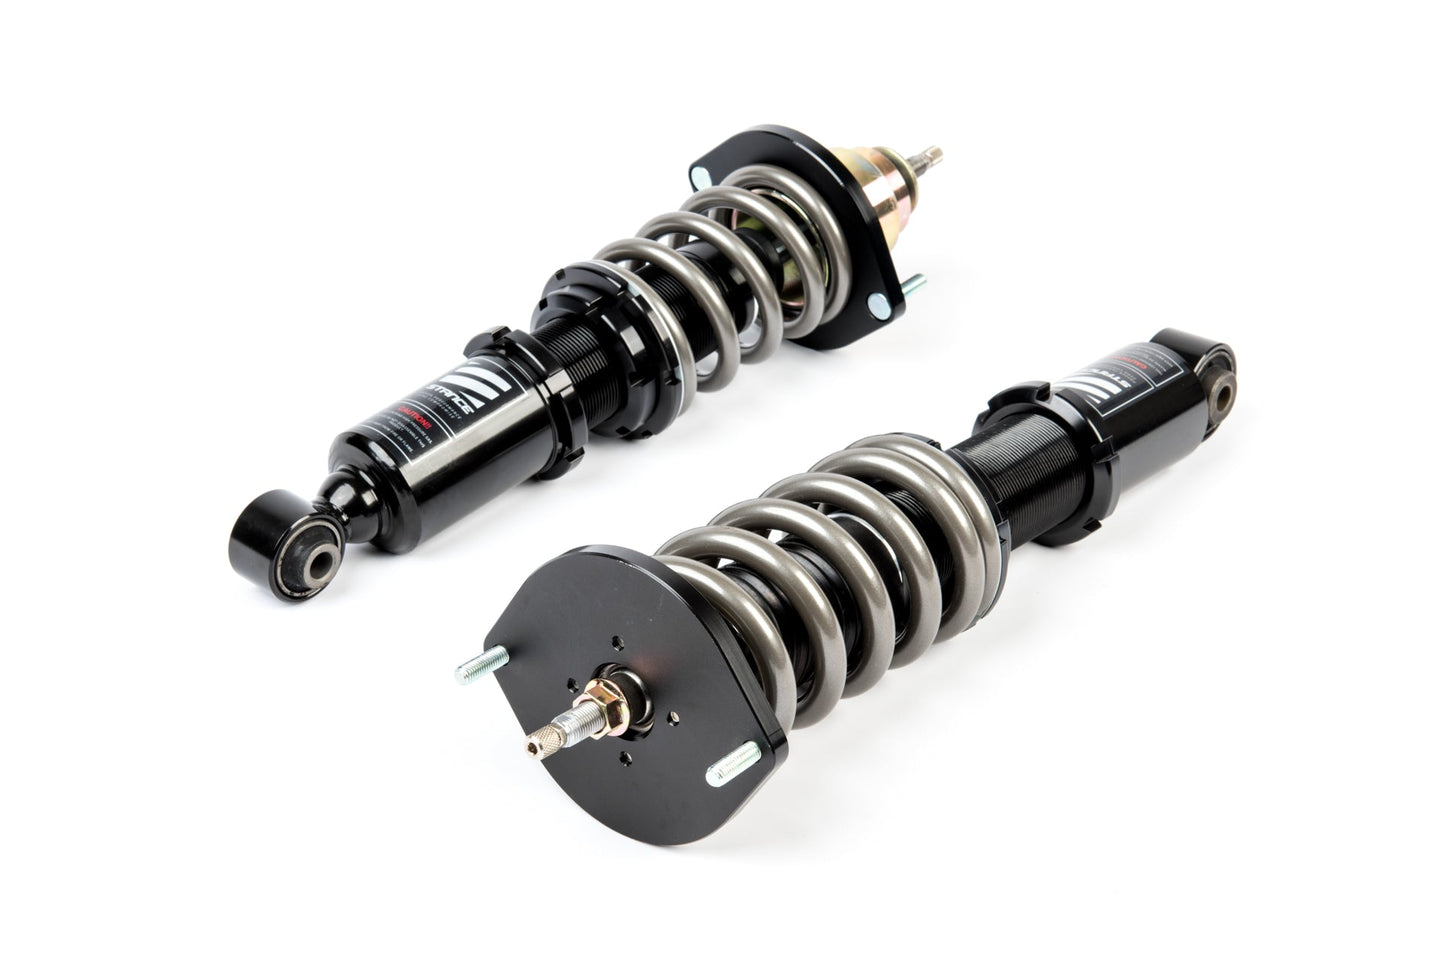 Stance Suspension - XR1 Coilovers for 99-05 Mazda Miata NB8C (ST-NB8C-XR1)